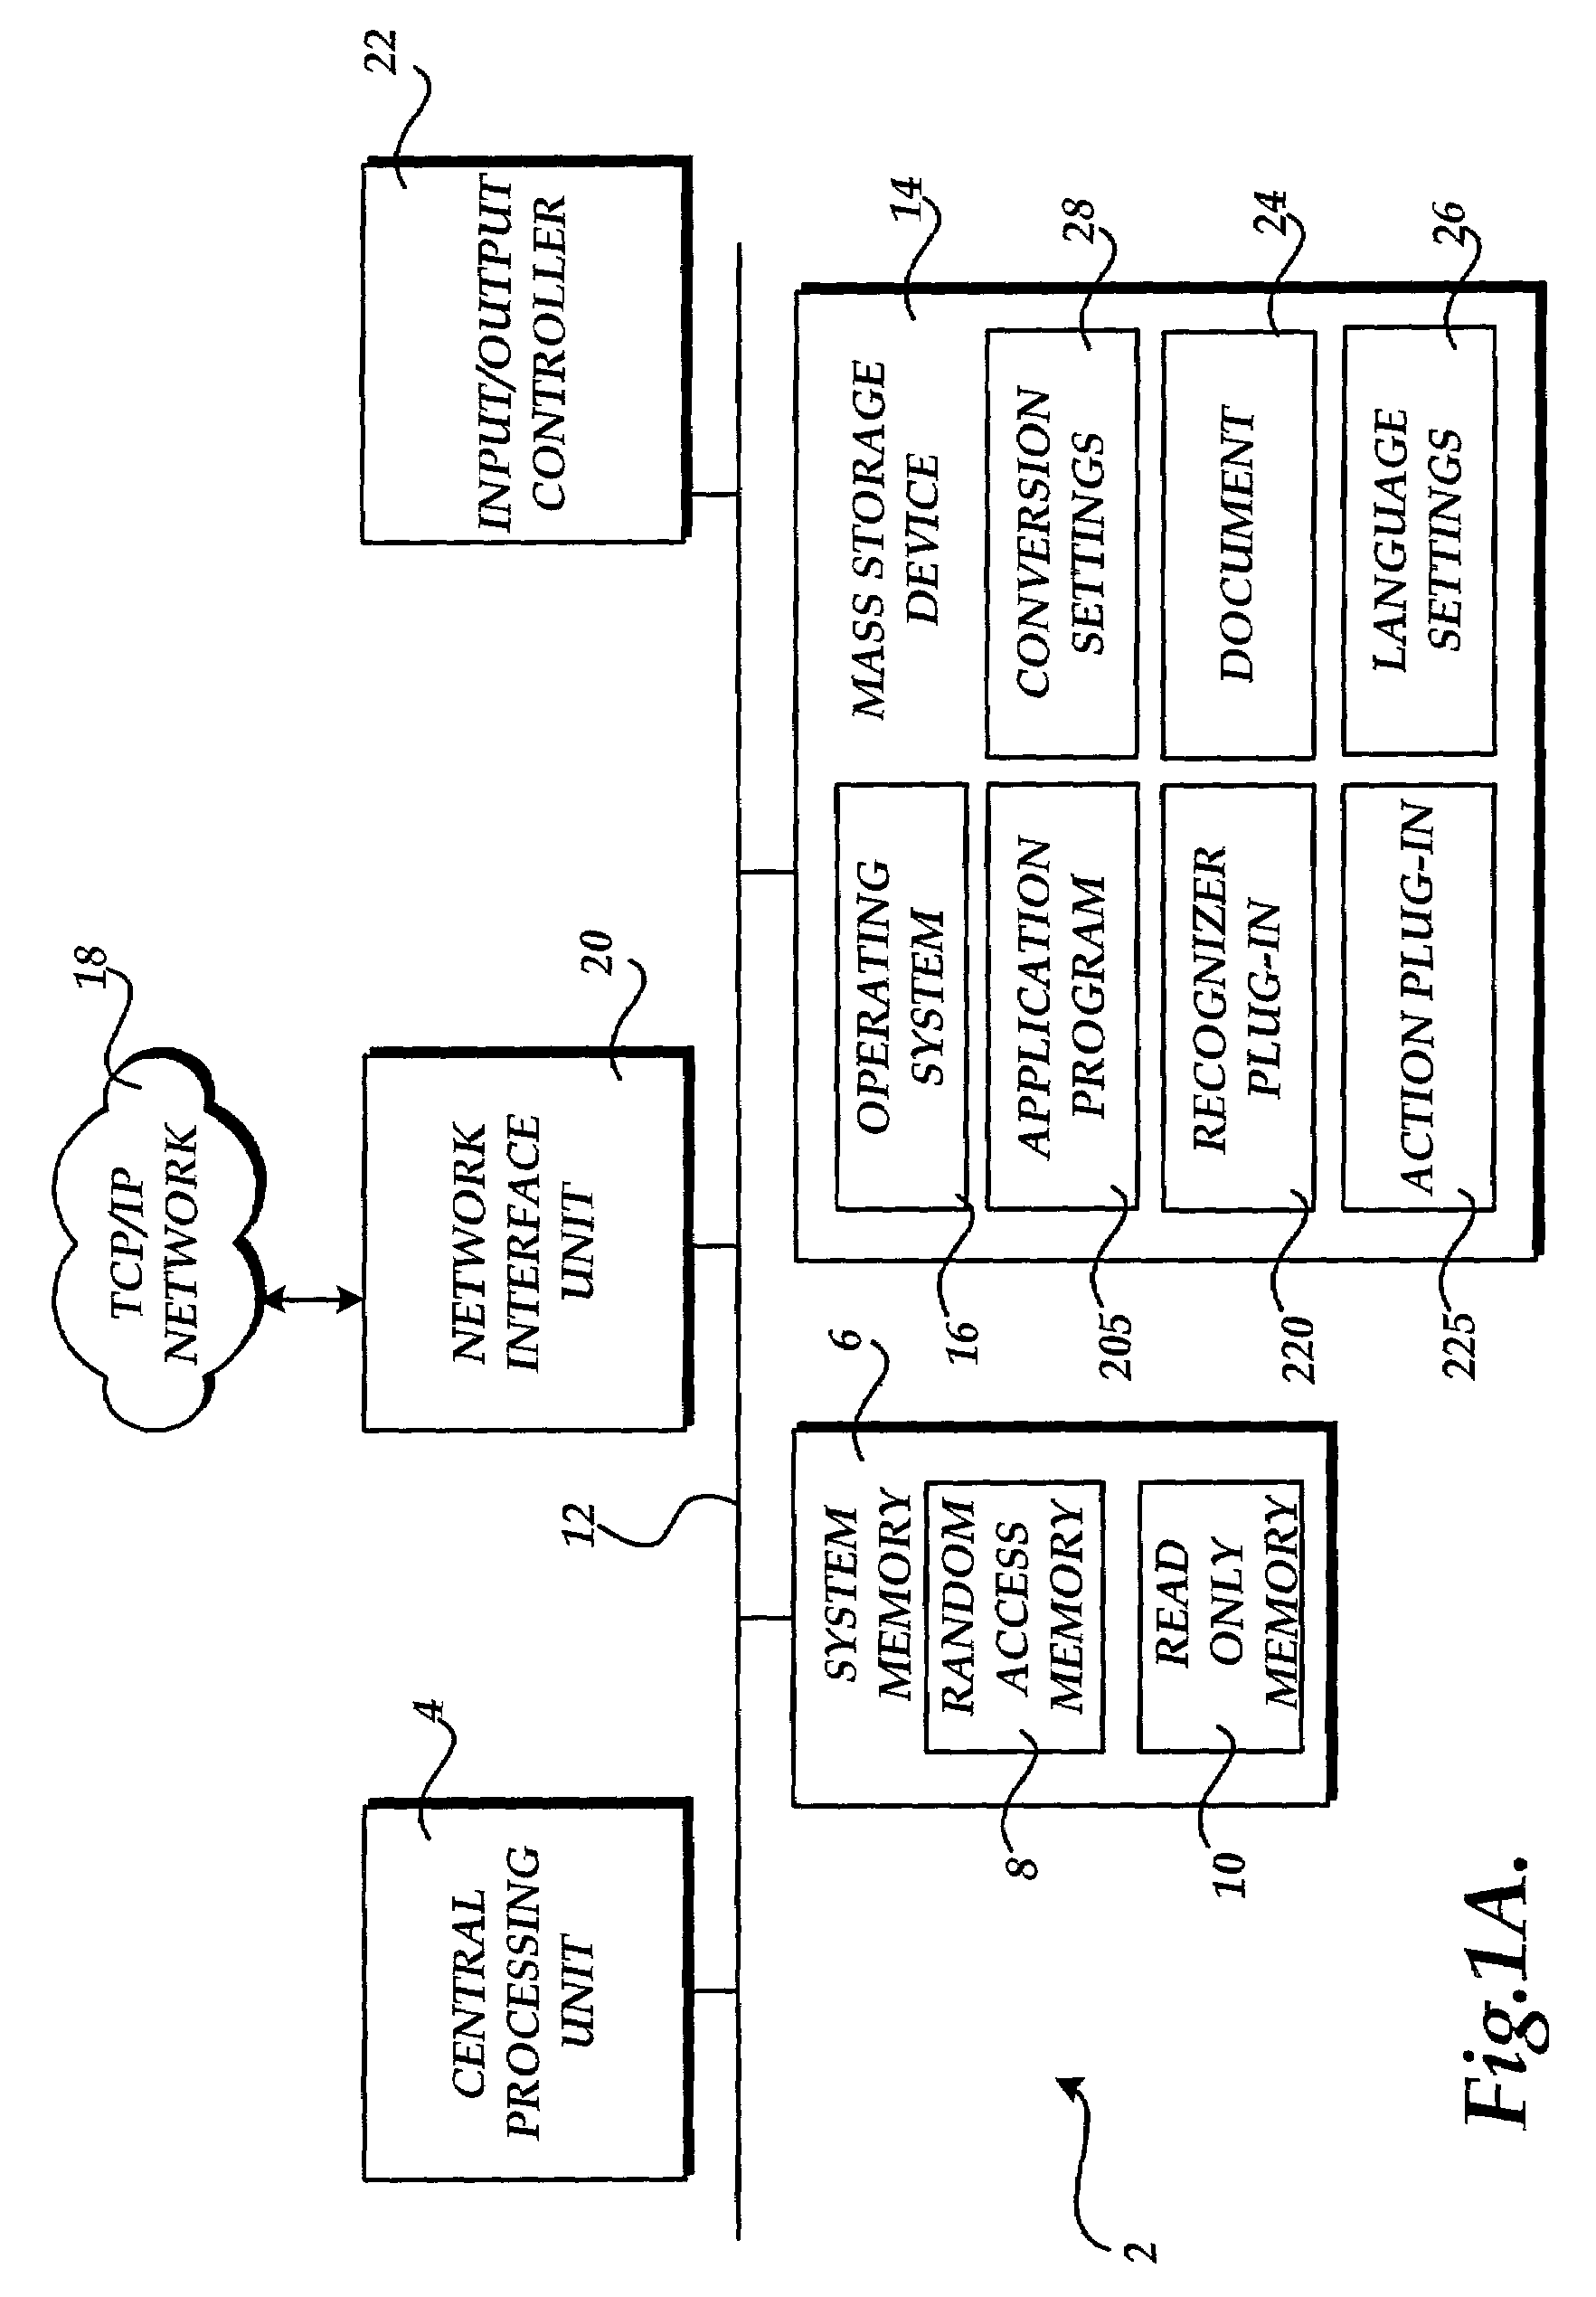 Method, system, and apparatus for converting numbers between measurement systems based upon semantically labeled strings